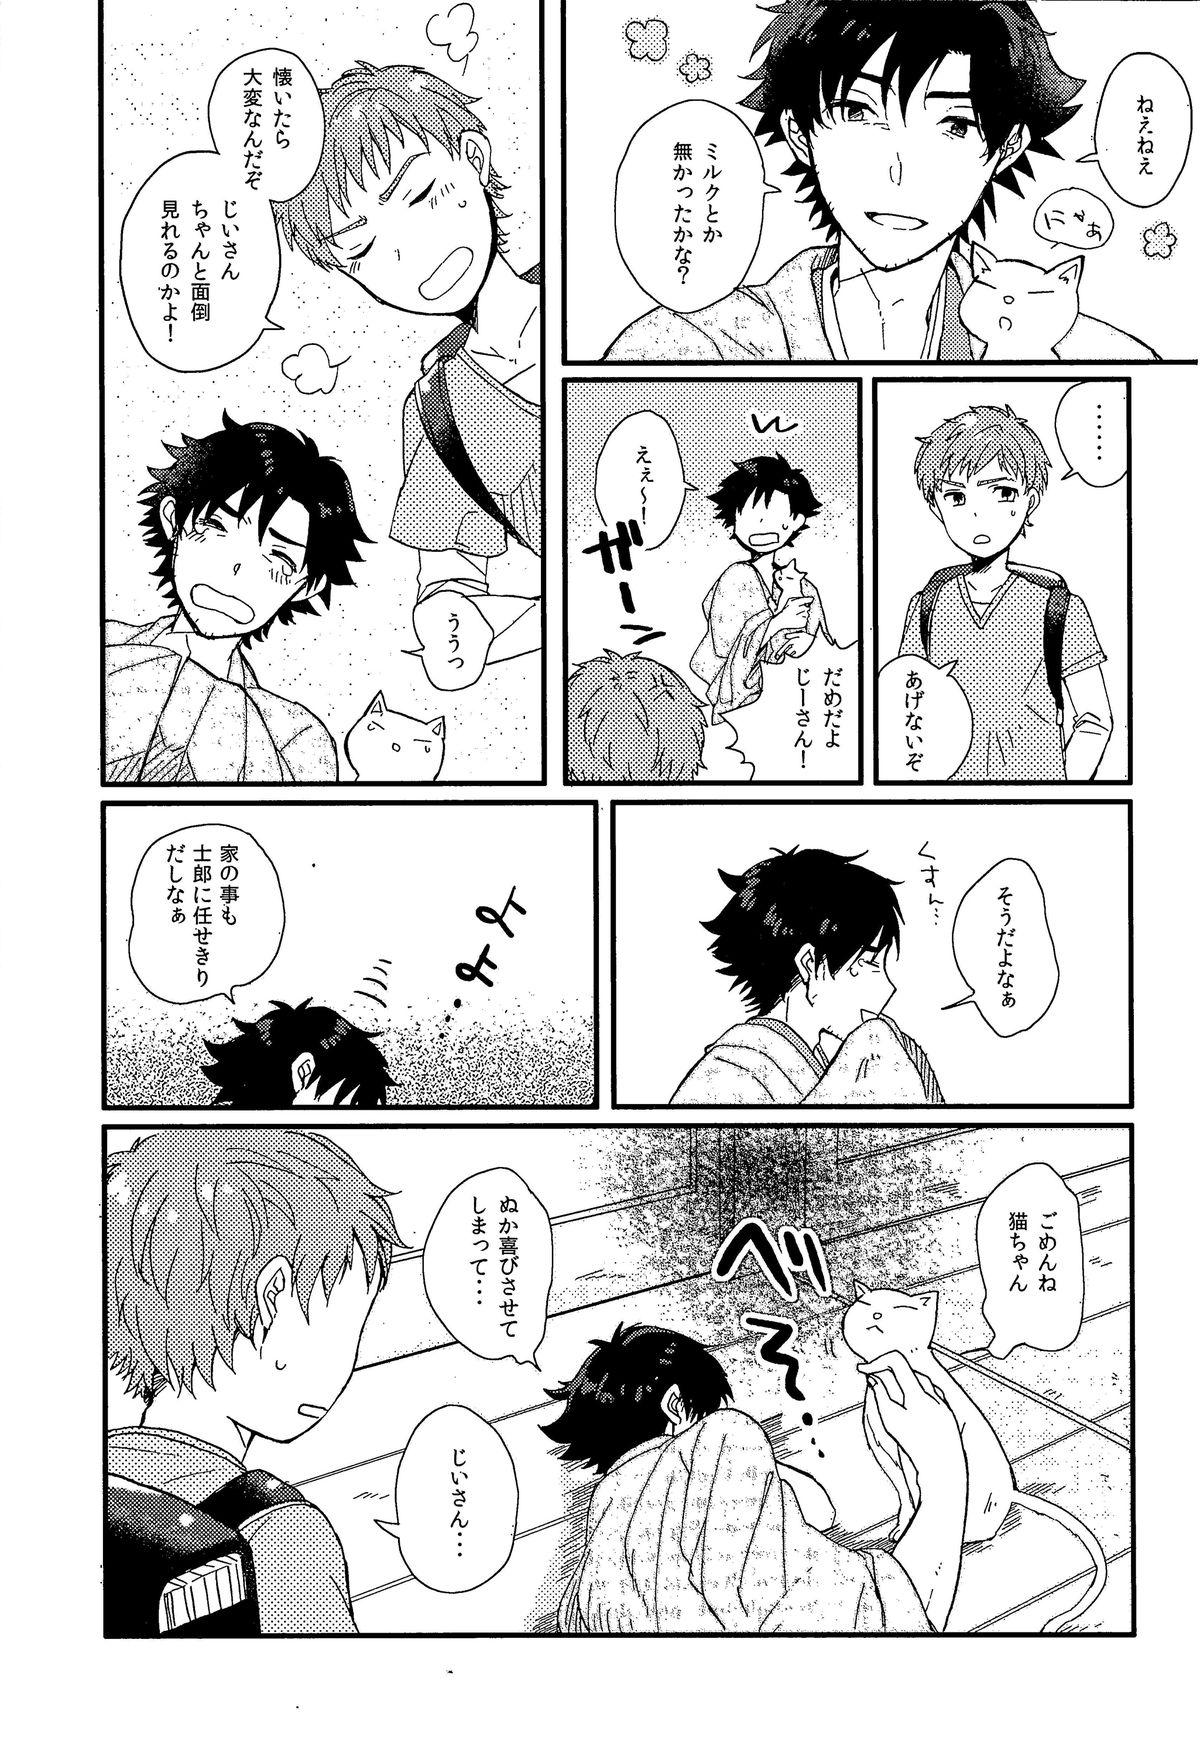 Best Blowjob Afterwards - Fate zero Couch - Page 4